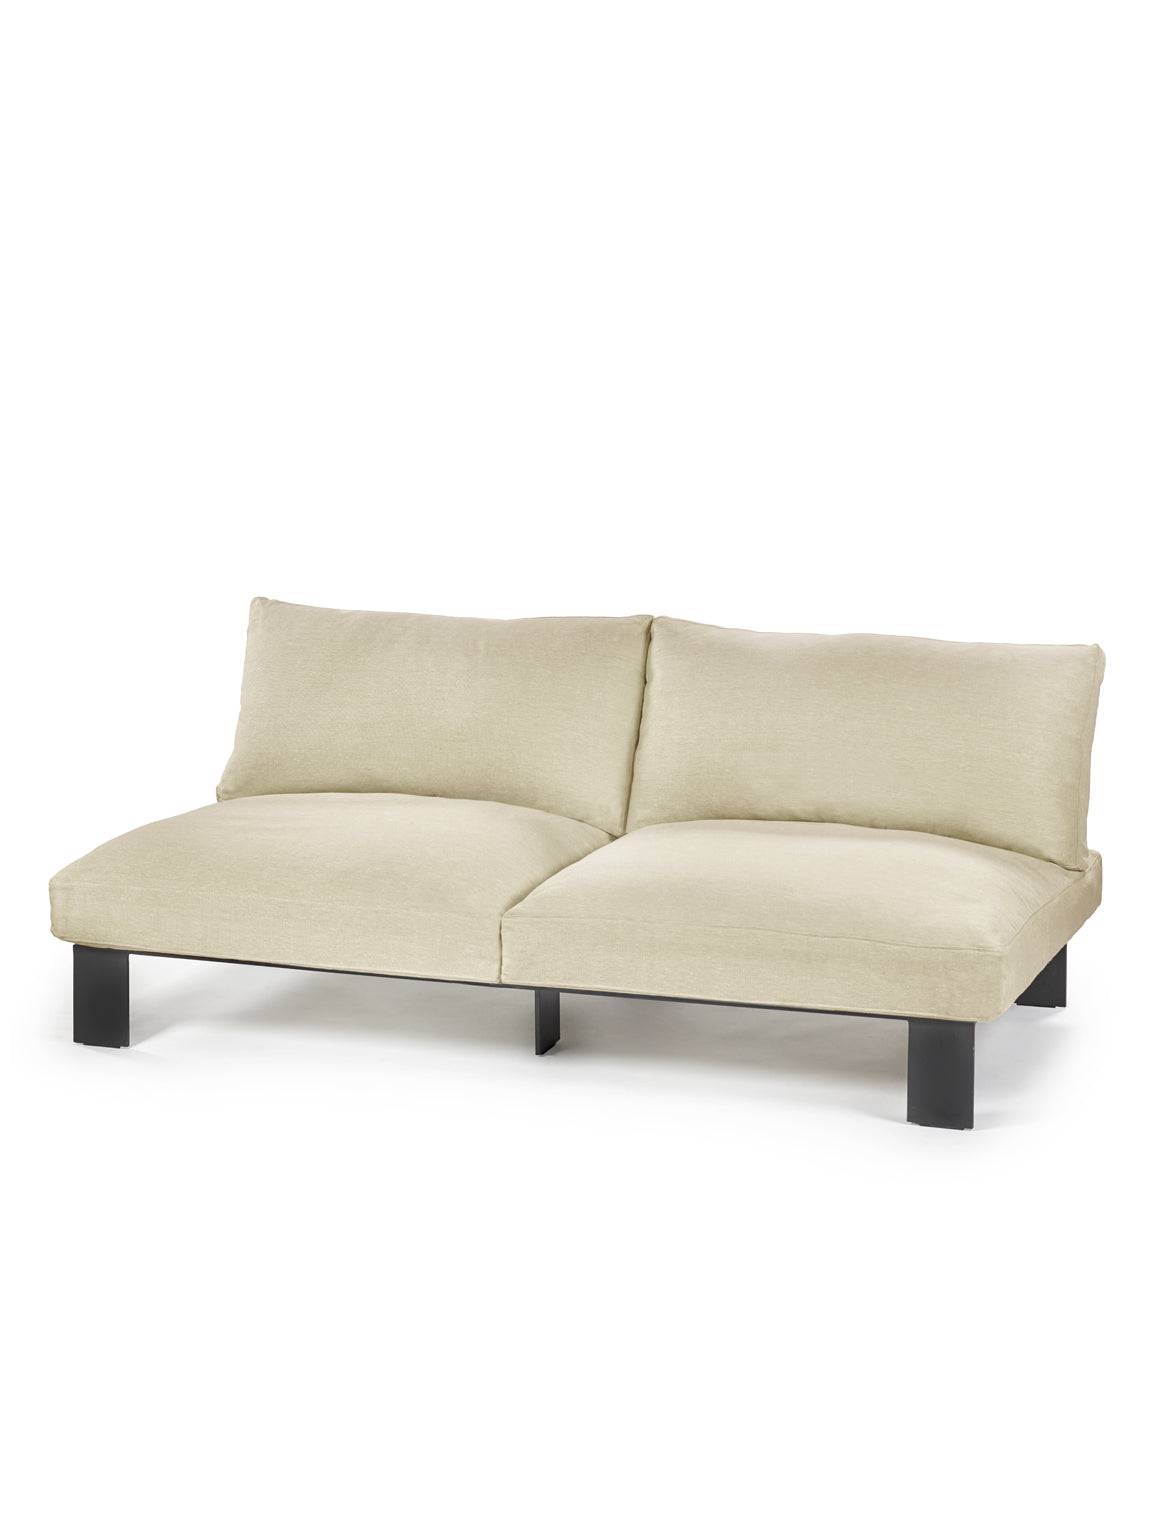 Mombaers Sofa - Natural - THAT COOL LIVING